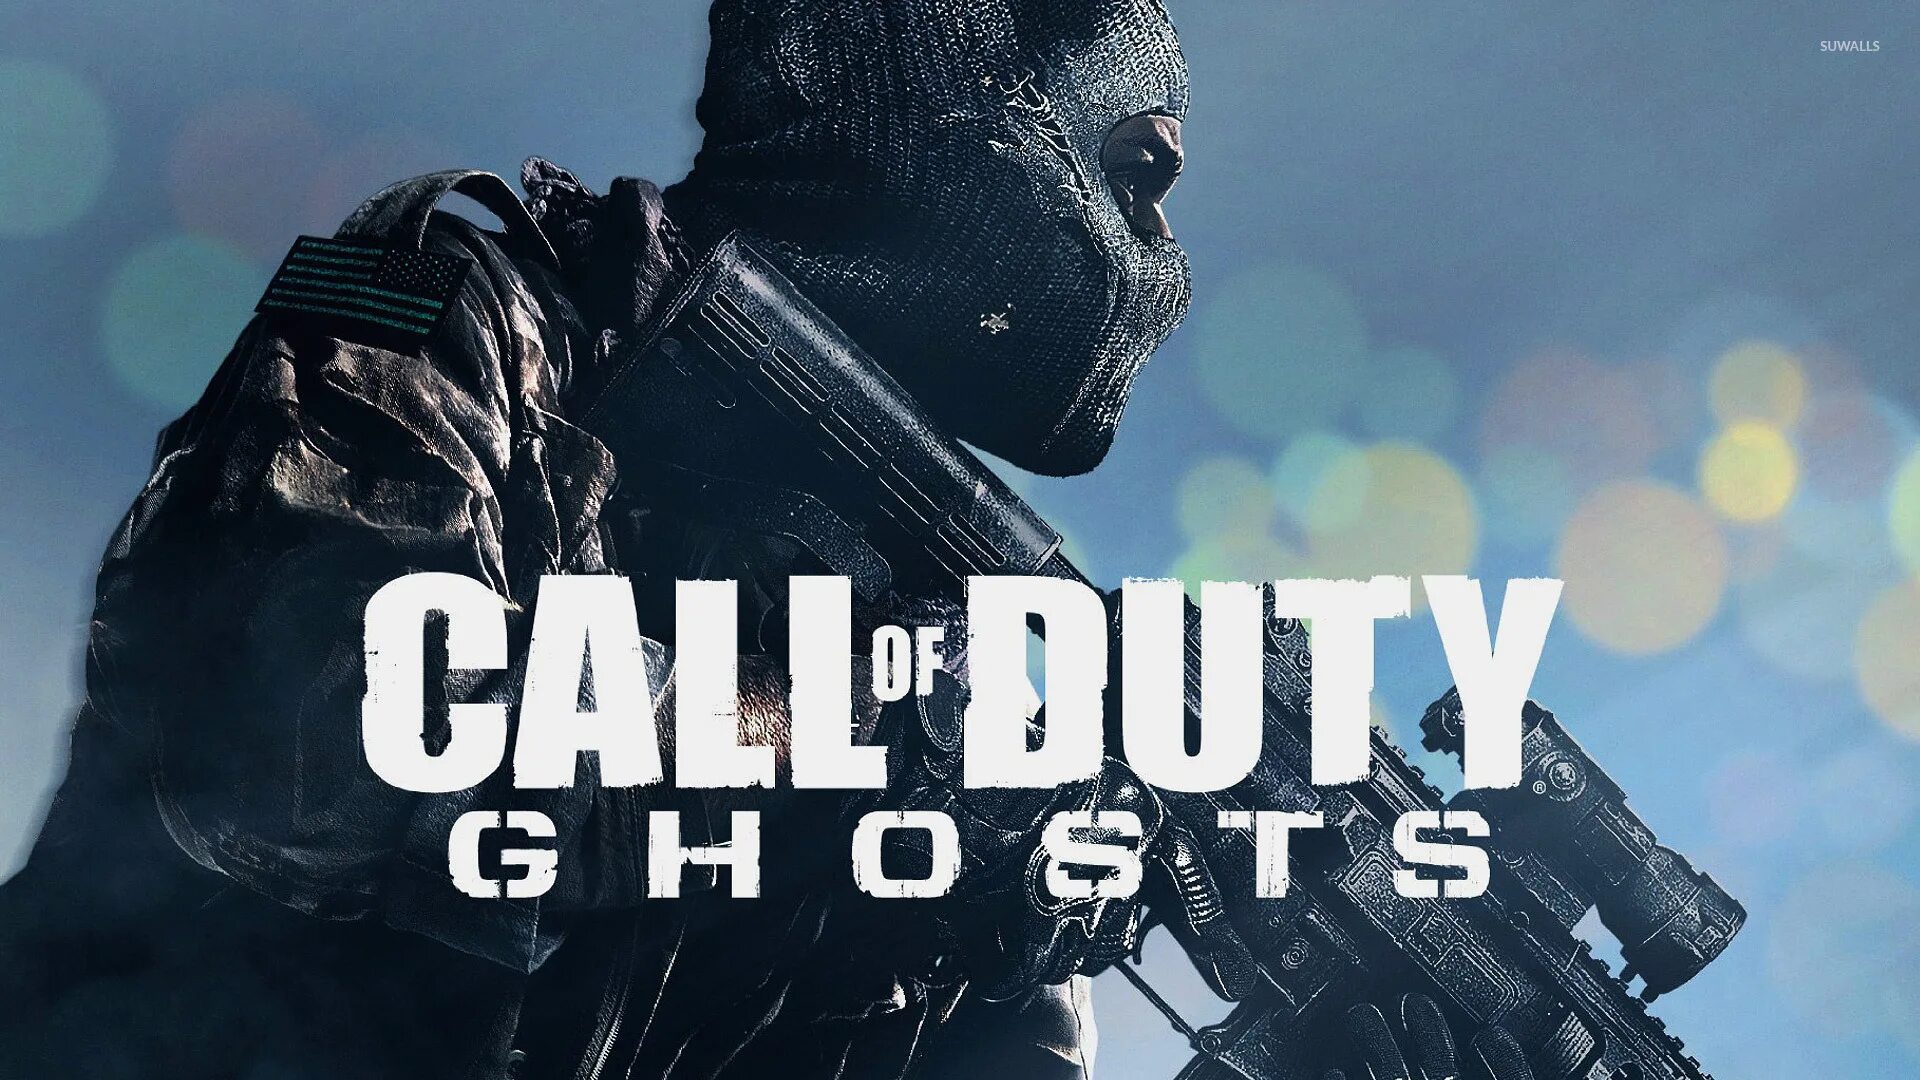 Call of Duty: Ghosts. Гоуст Call of Duty. Call of Duty Ghosts призраки. Call of Duty Ghosts гоуст. Cool of duty